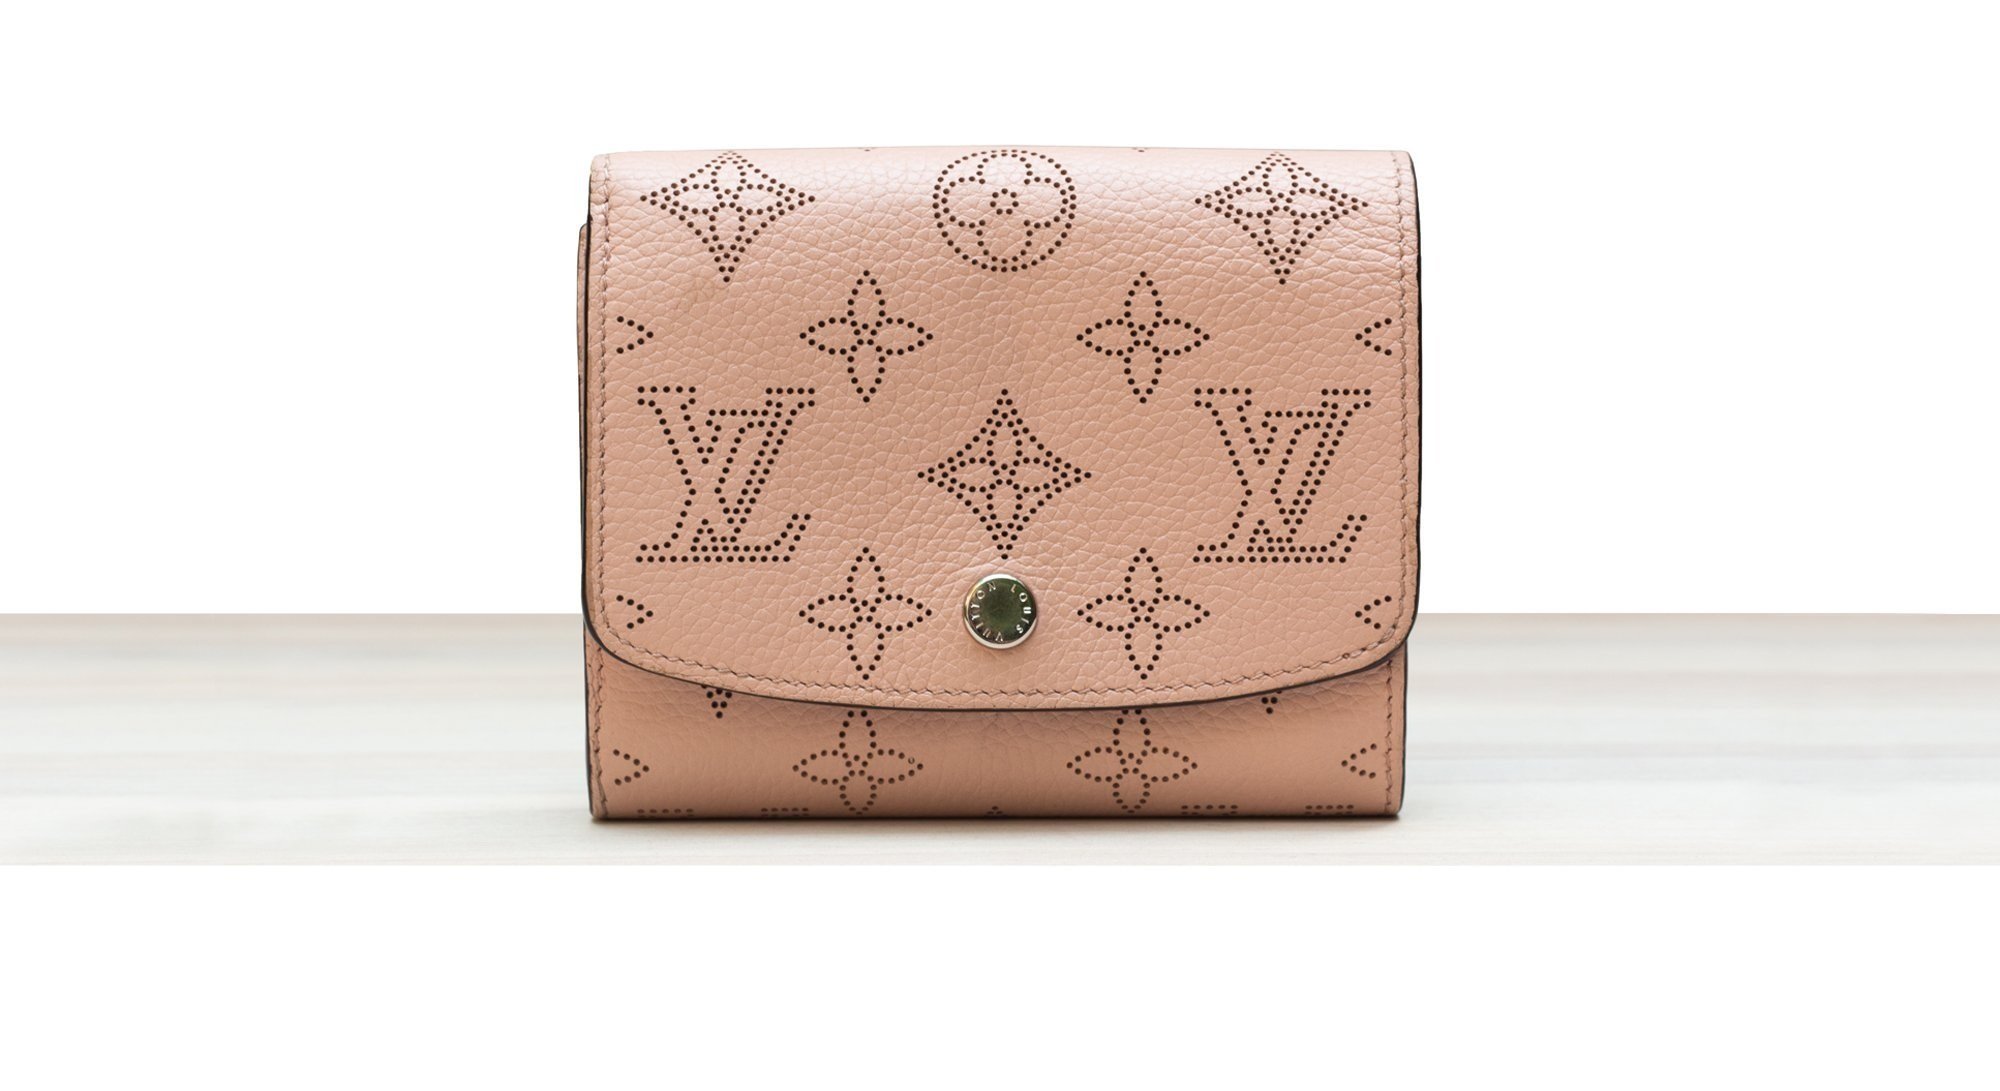 Louis vuitton speedy - Revived Bag Repair and restoration